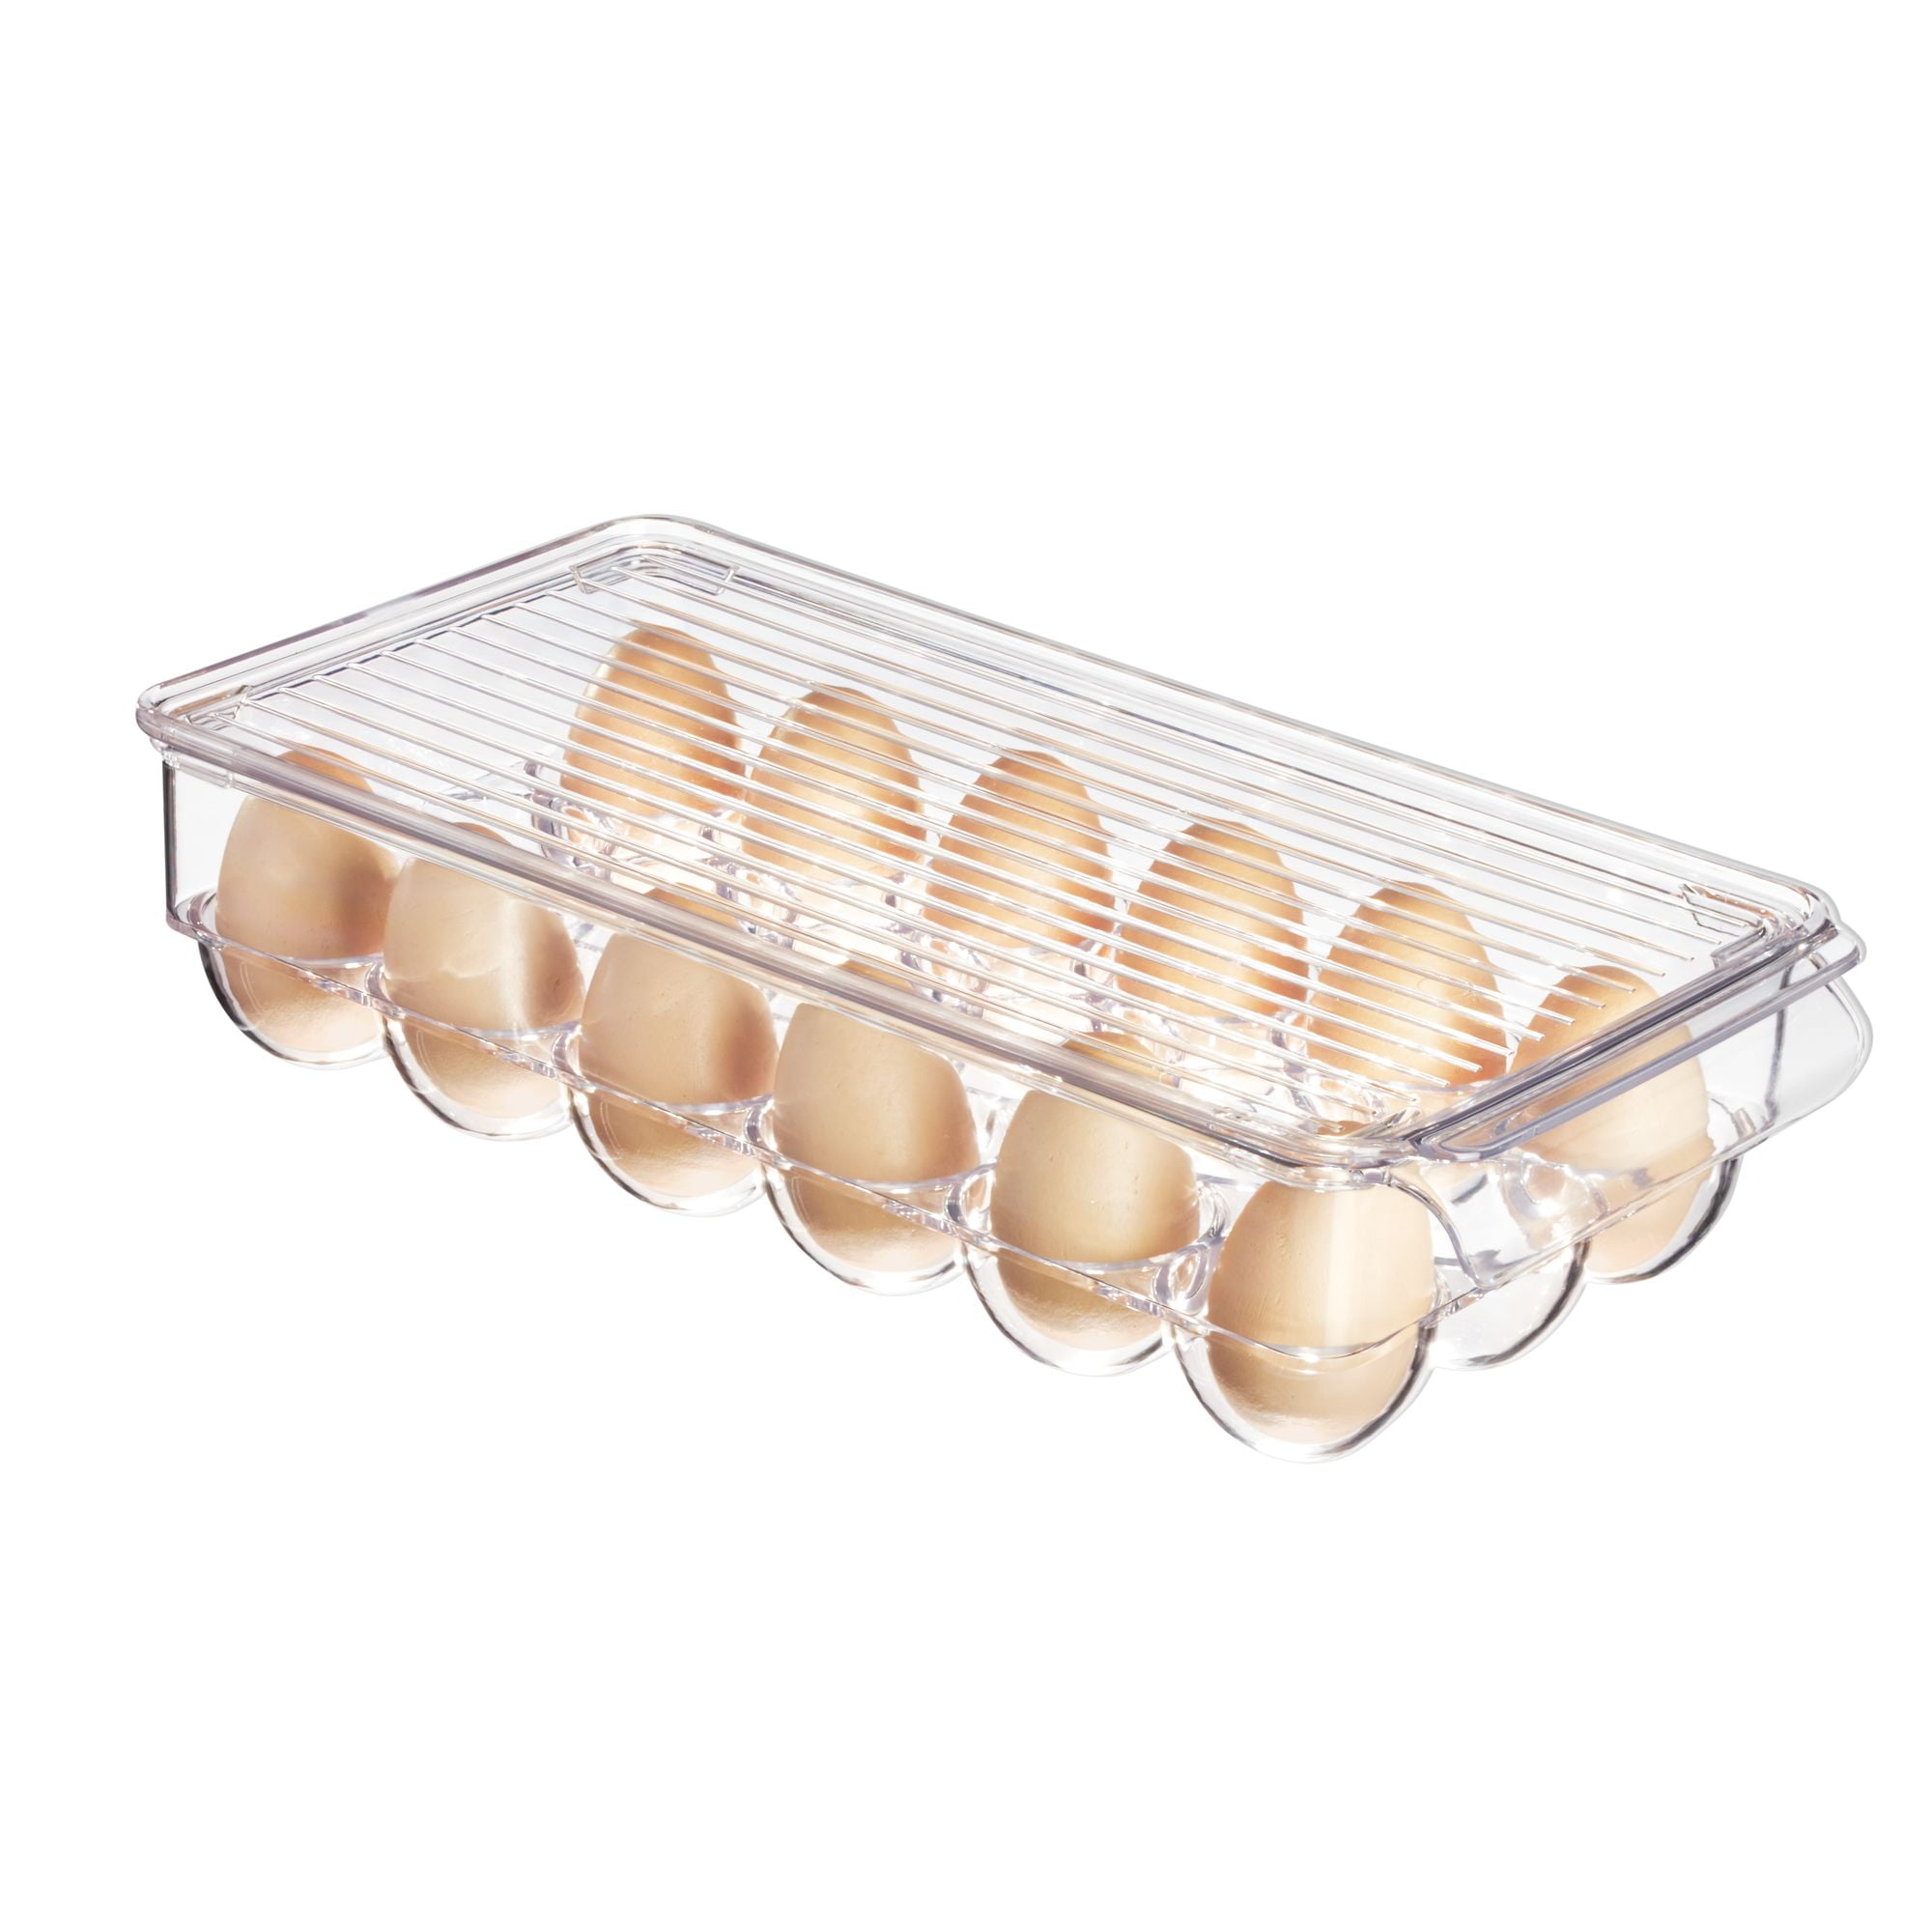  iDesign Plastic Egg Holder for Refrigerator with Handle and  Lid, Fridge Storage Organizer for Kitchen, Holds up to 14, 4.25 x 14.5 x  3, Clear - Egg Separators